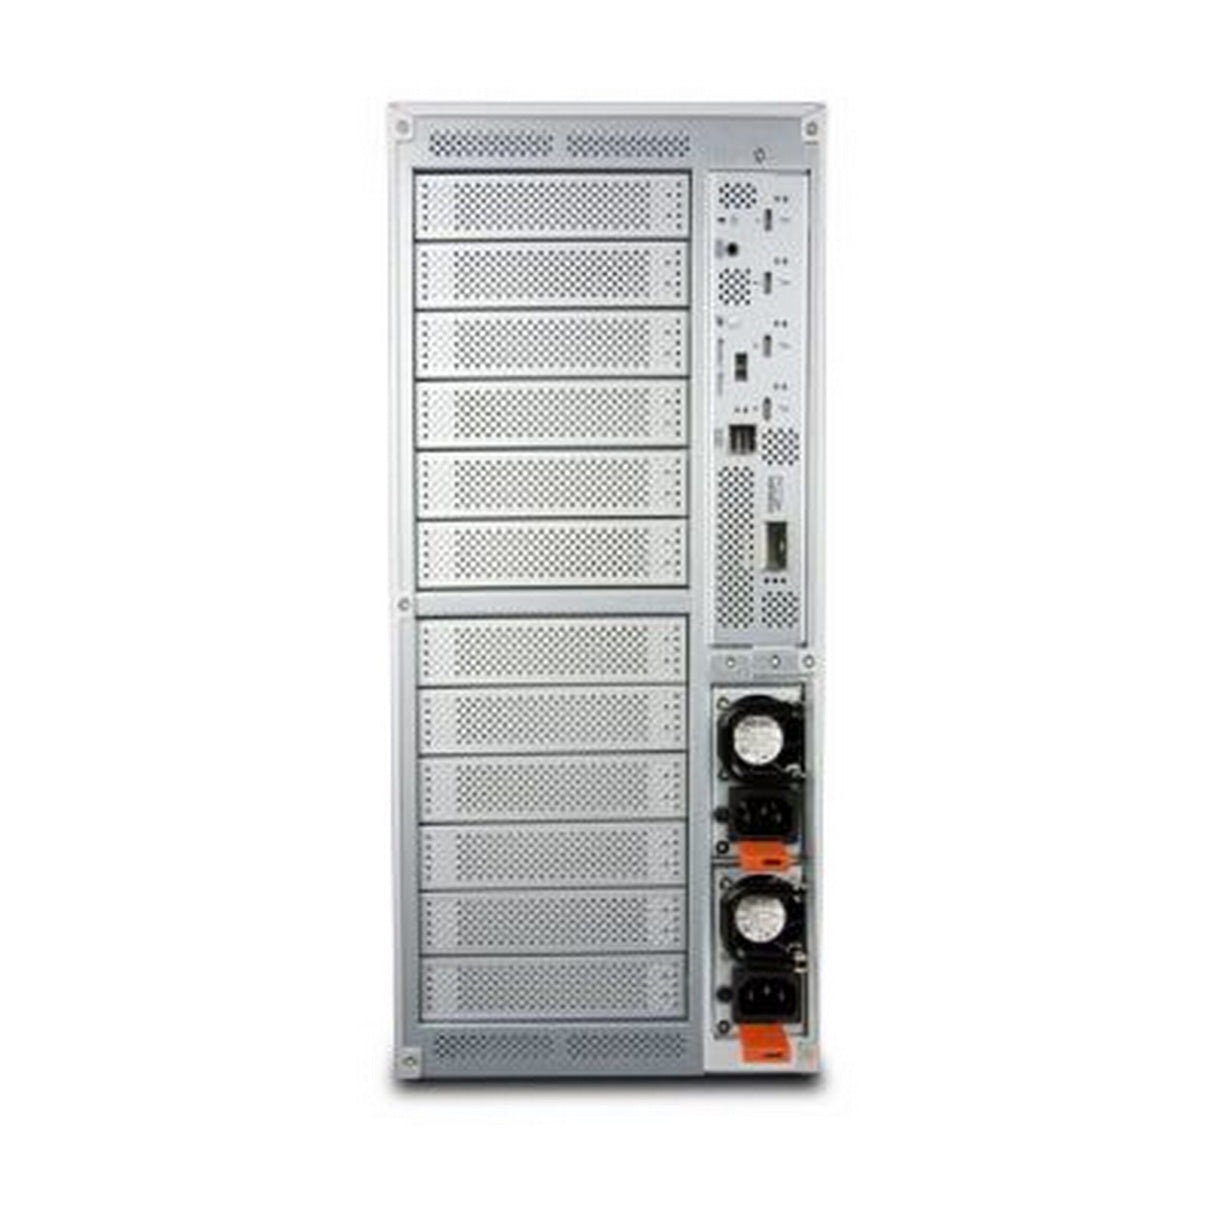 Accusys A12T3-Share+ 12-Bay Tower RAID System with Redundant Power Supply